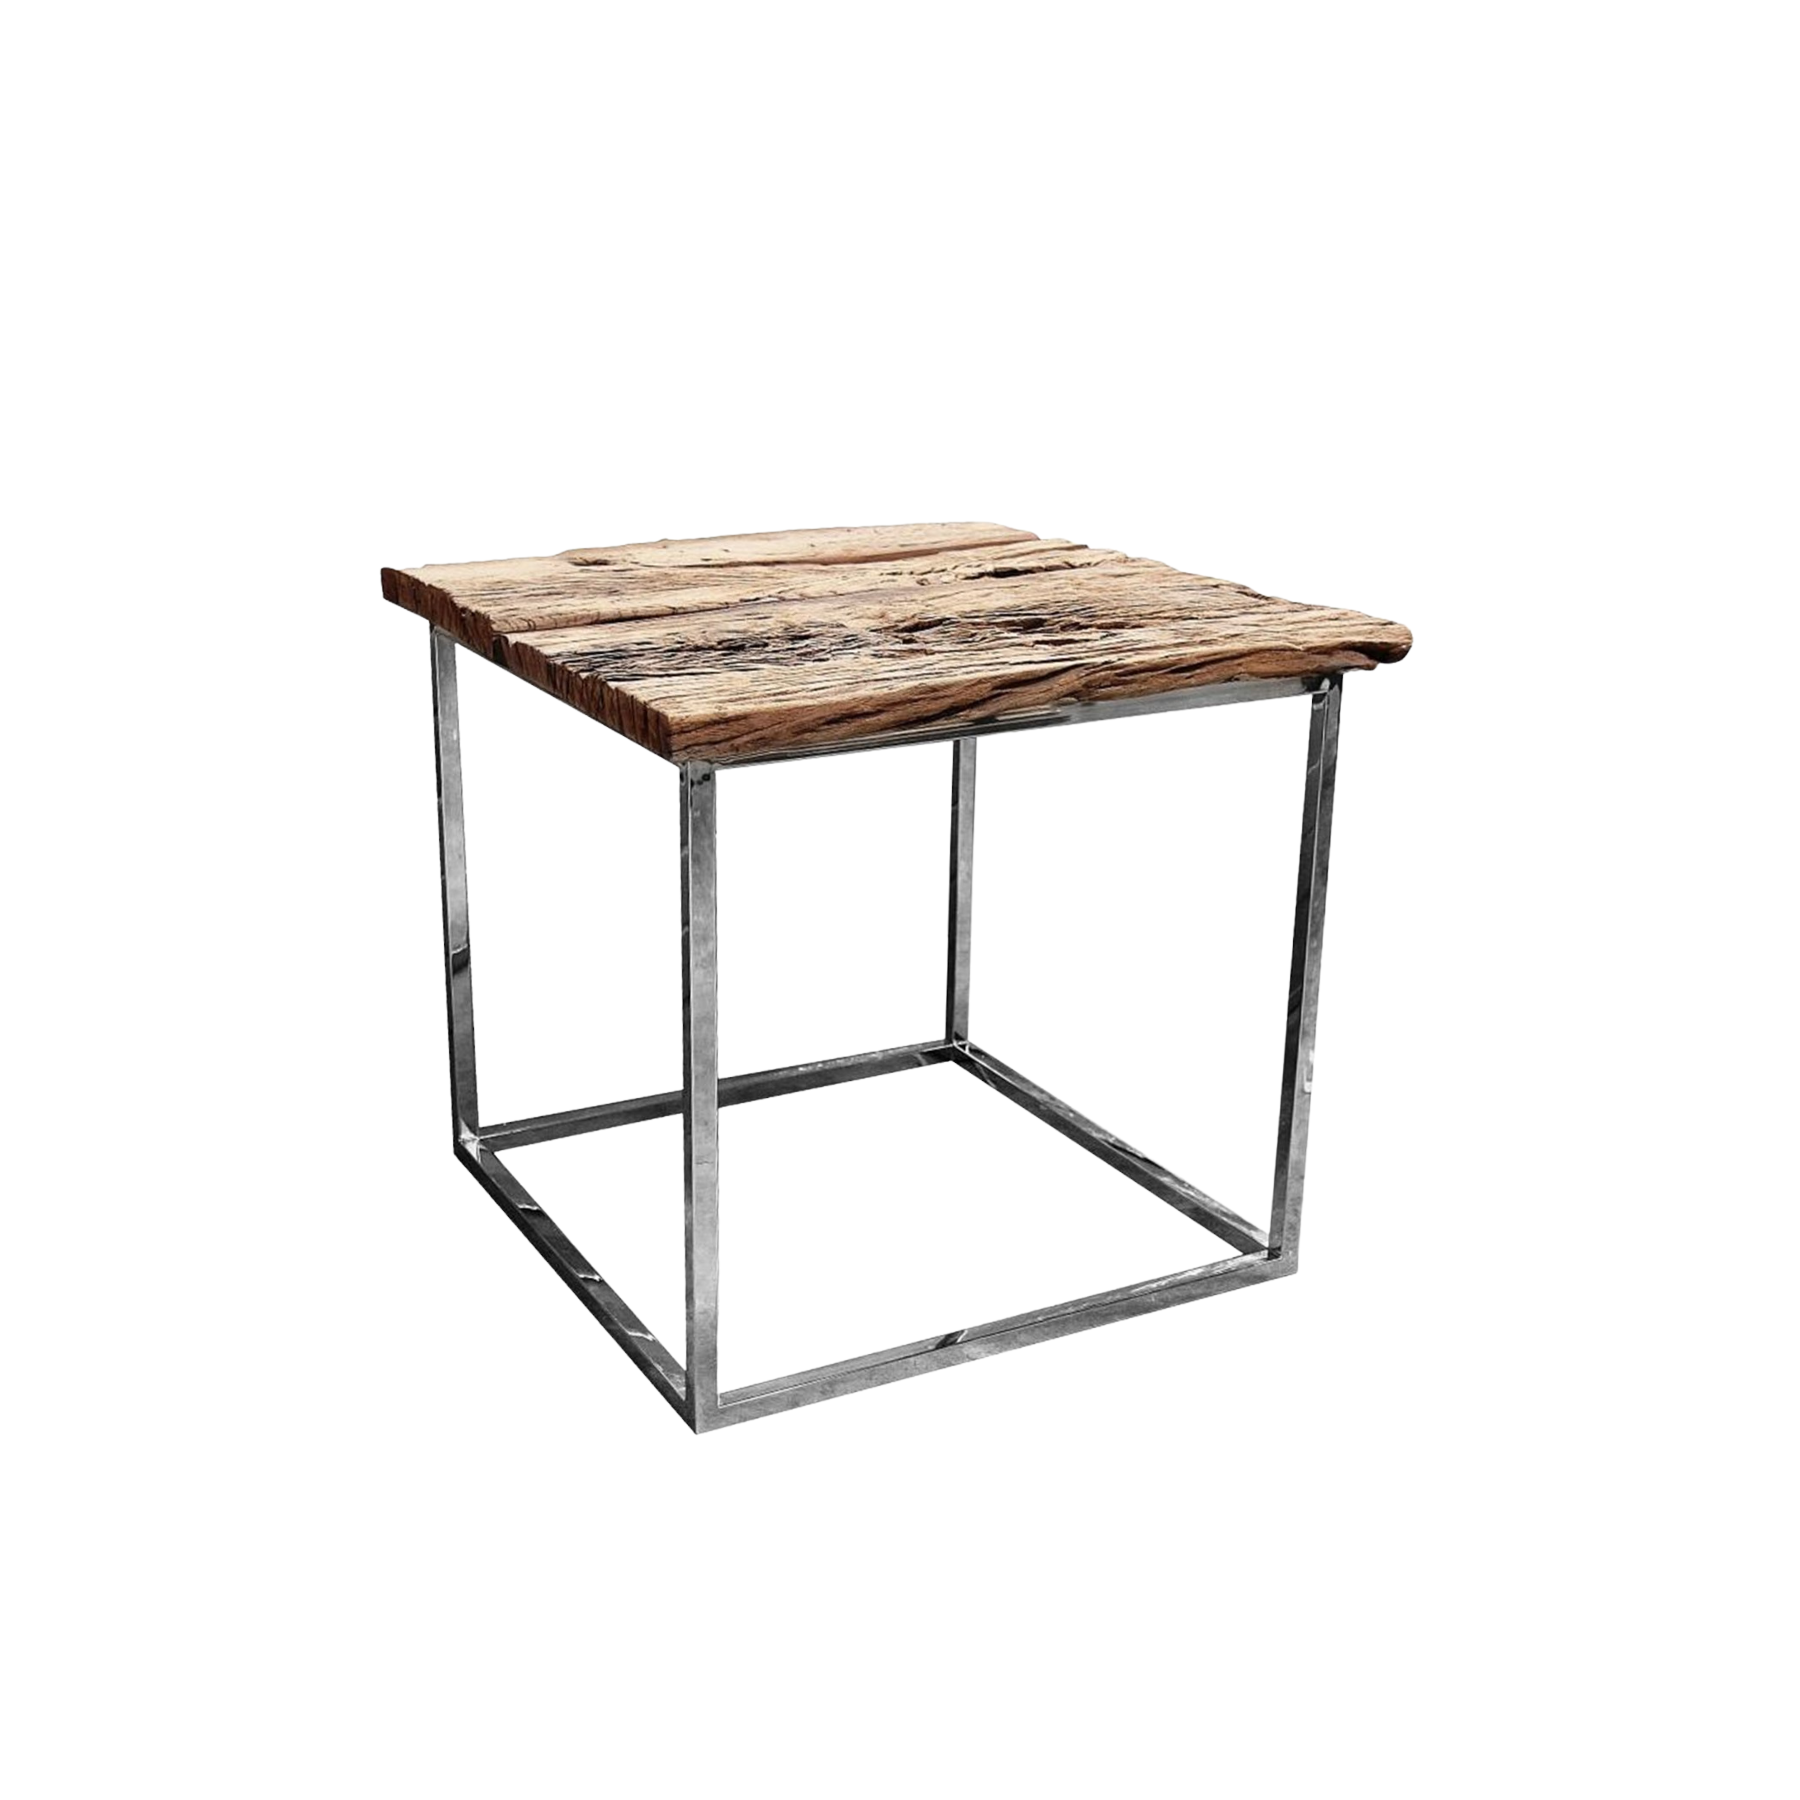 Rustic Square Side Table